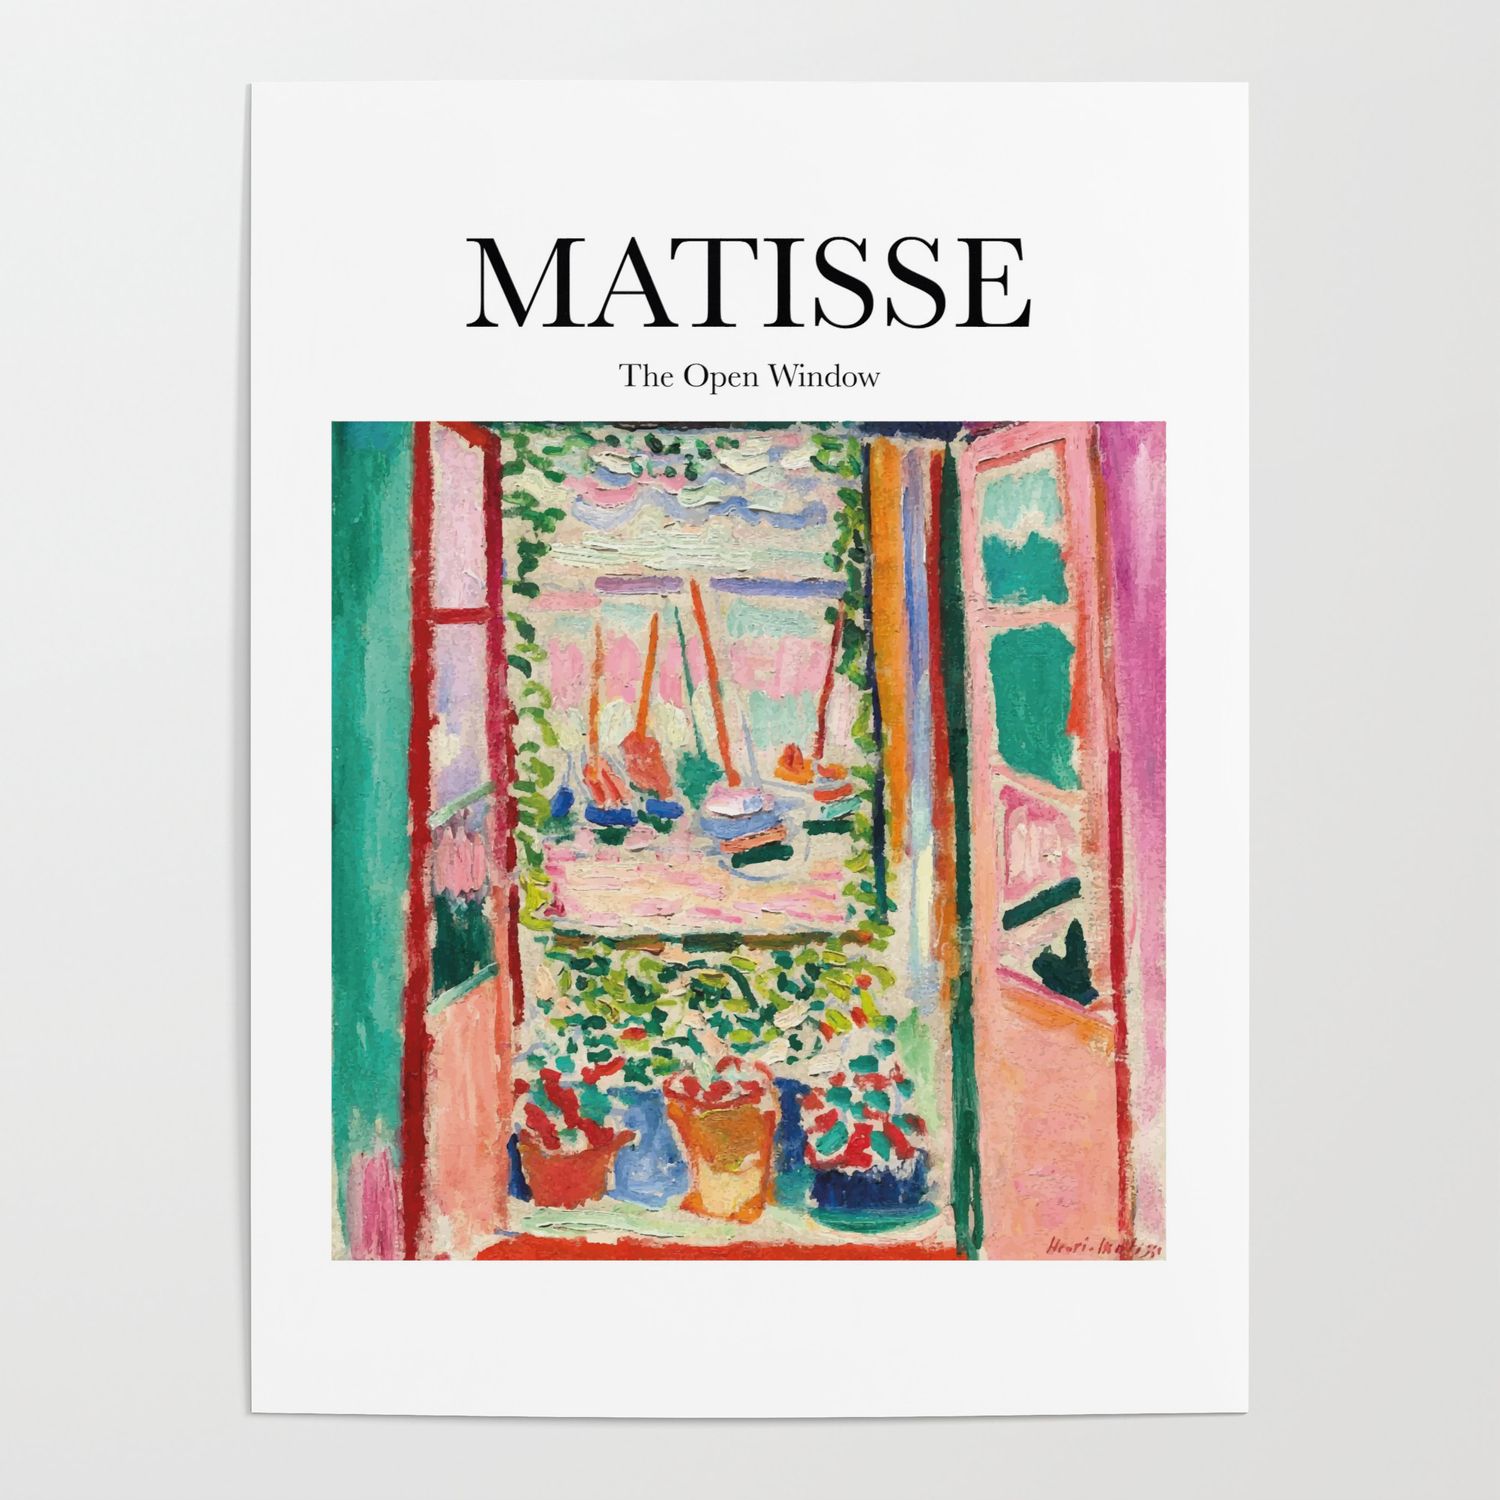 Matisse – The Open Window Posterartily | Society6 Pertaining To Most Popular The Open Window Wall Art (View 10 of 20)